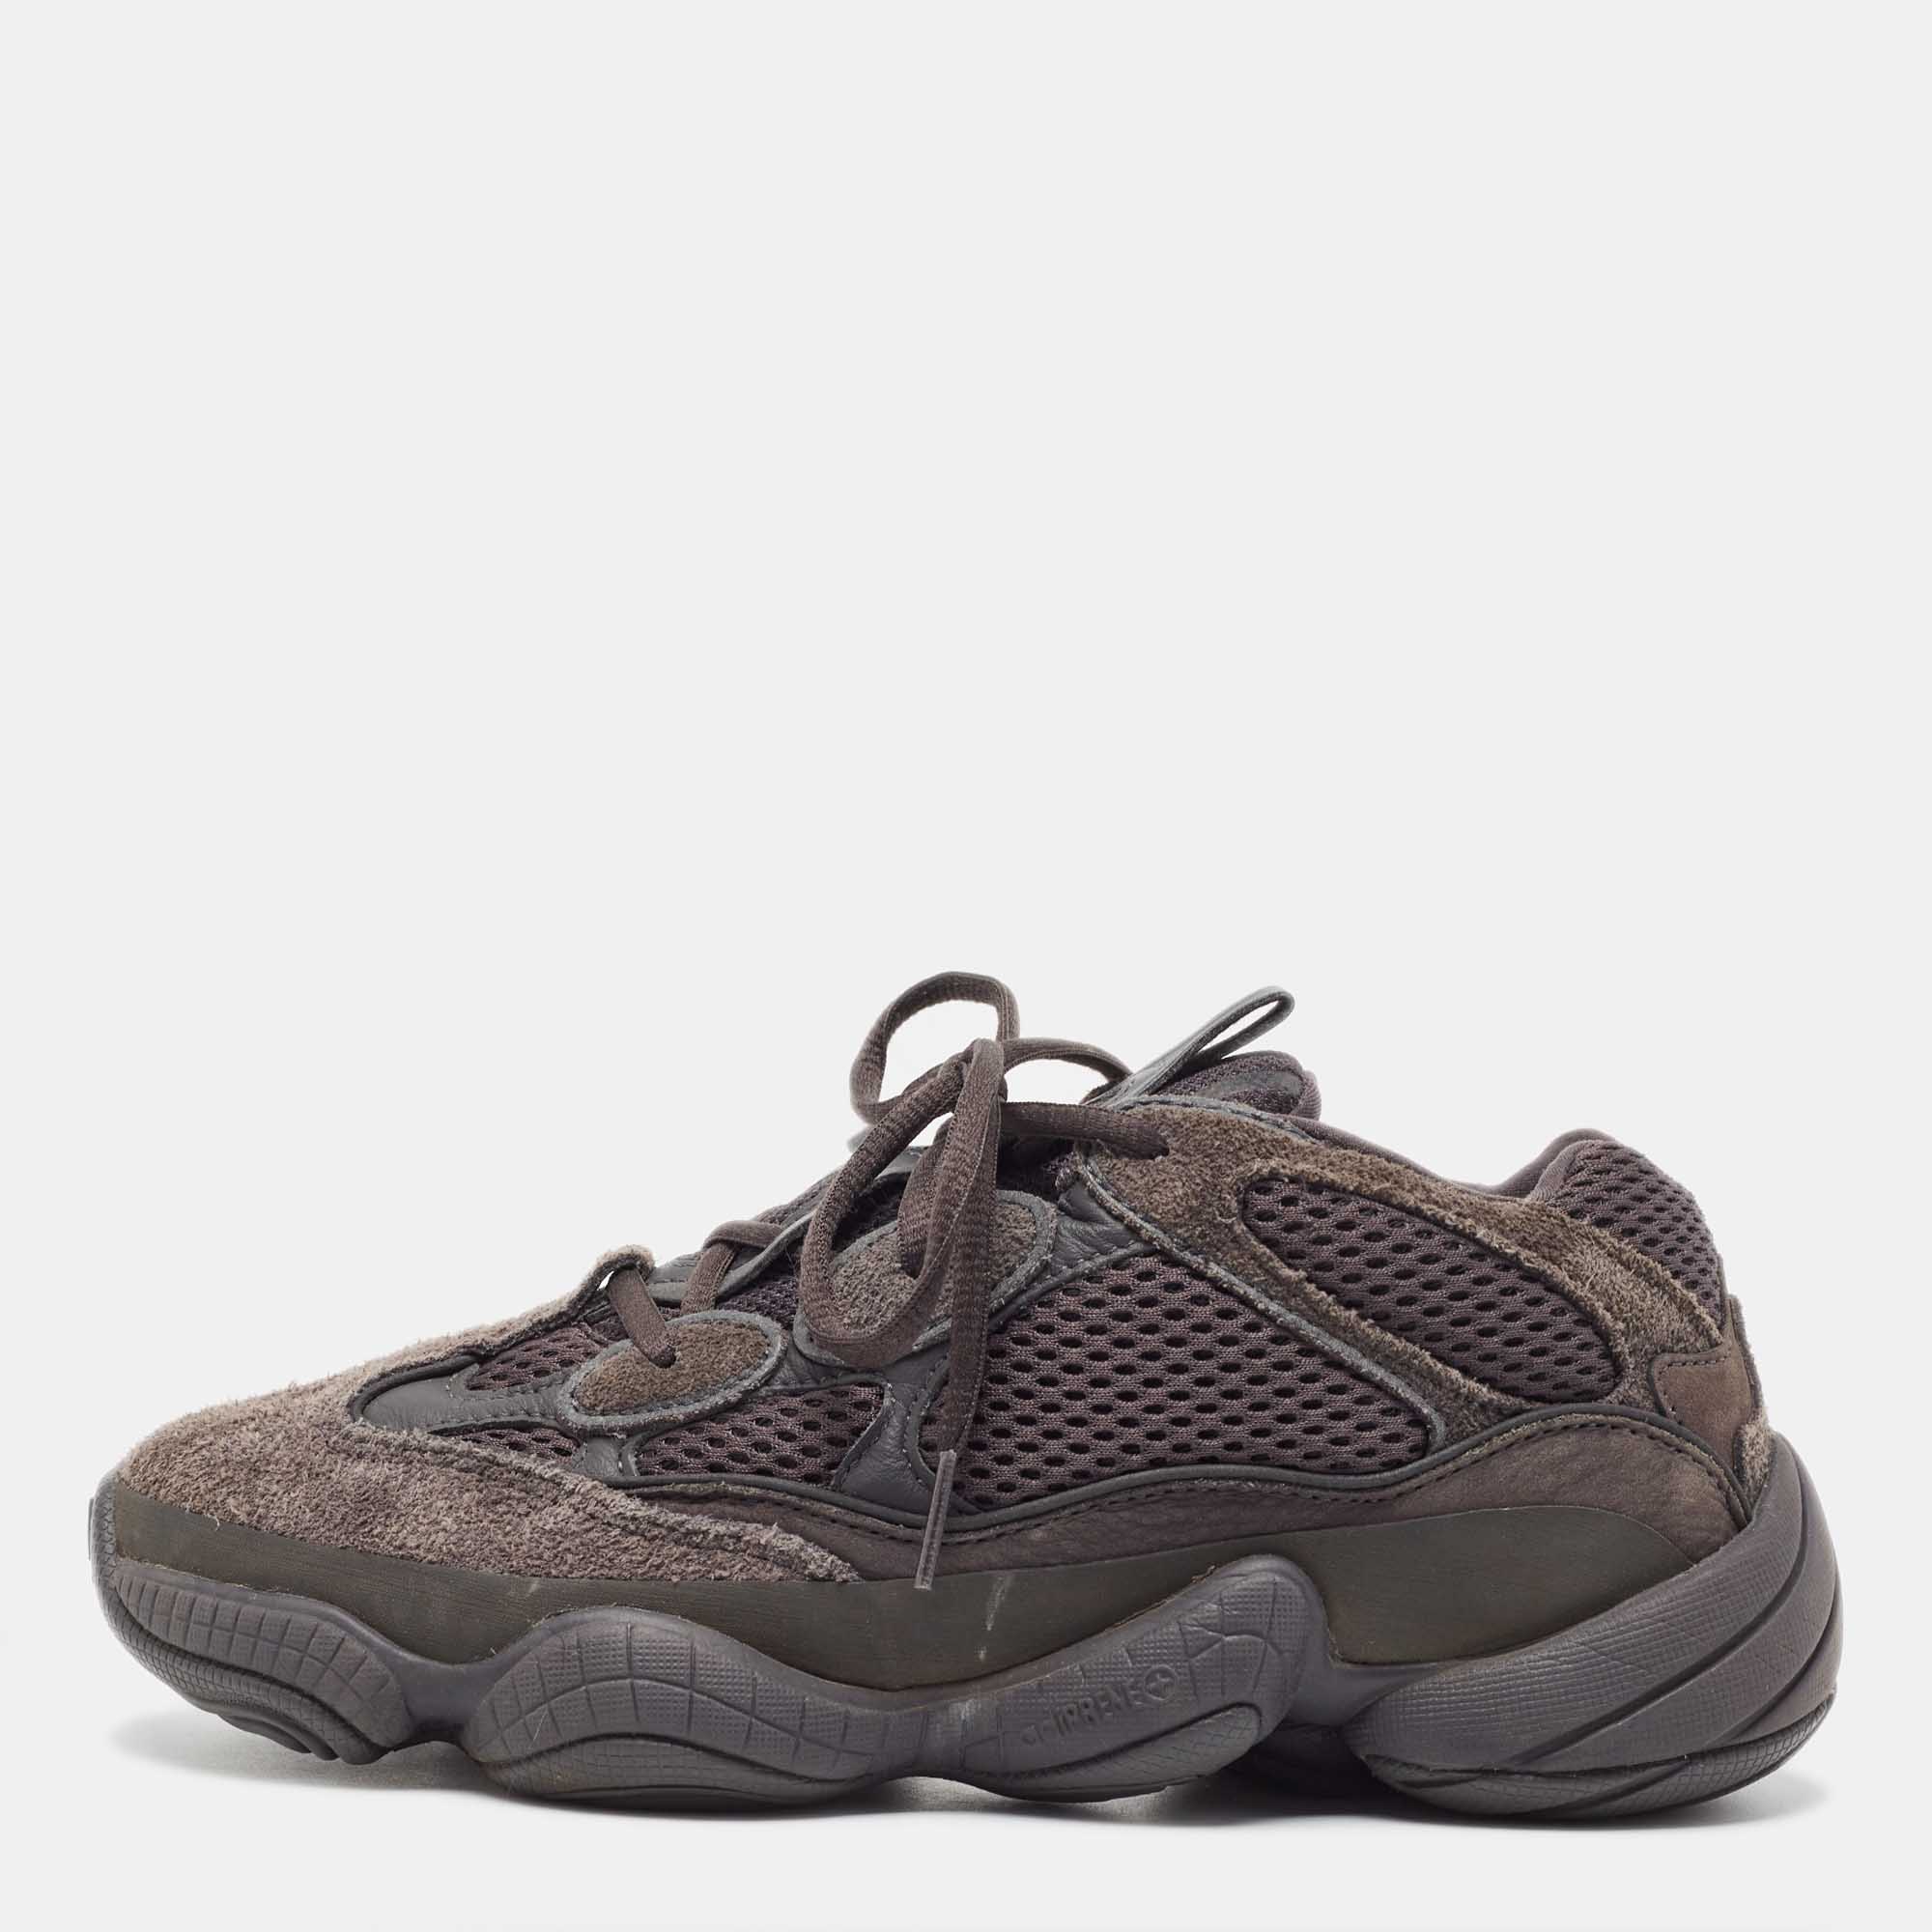 

Adidas x Yeezy Black Mesh and Suede Boost Yeezy 500-utility-Black Sneakers Size